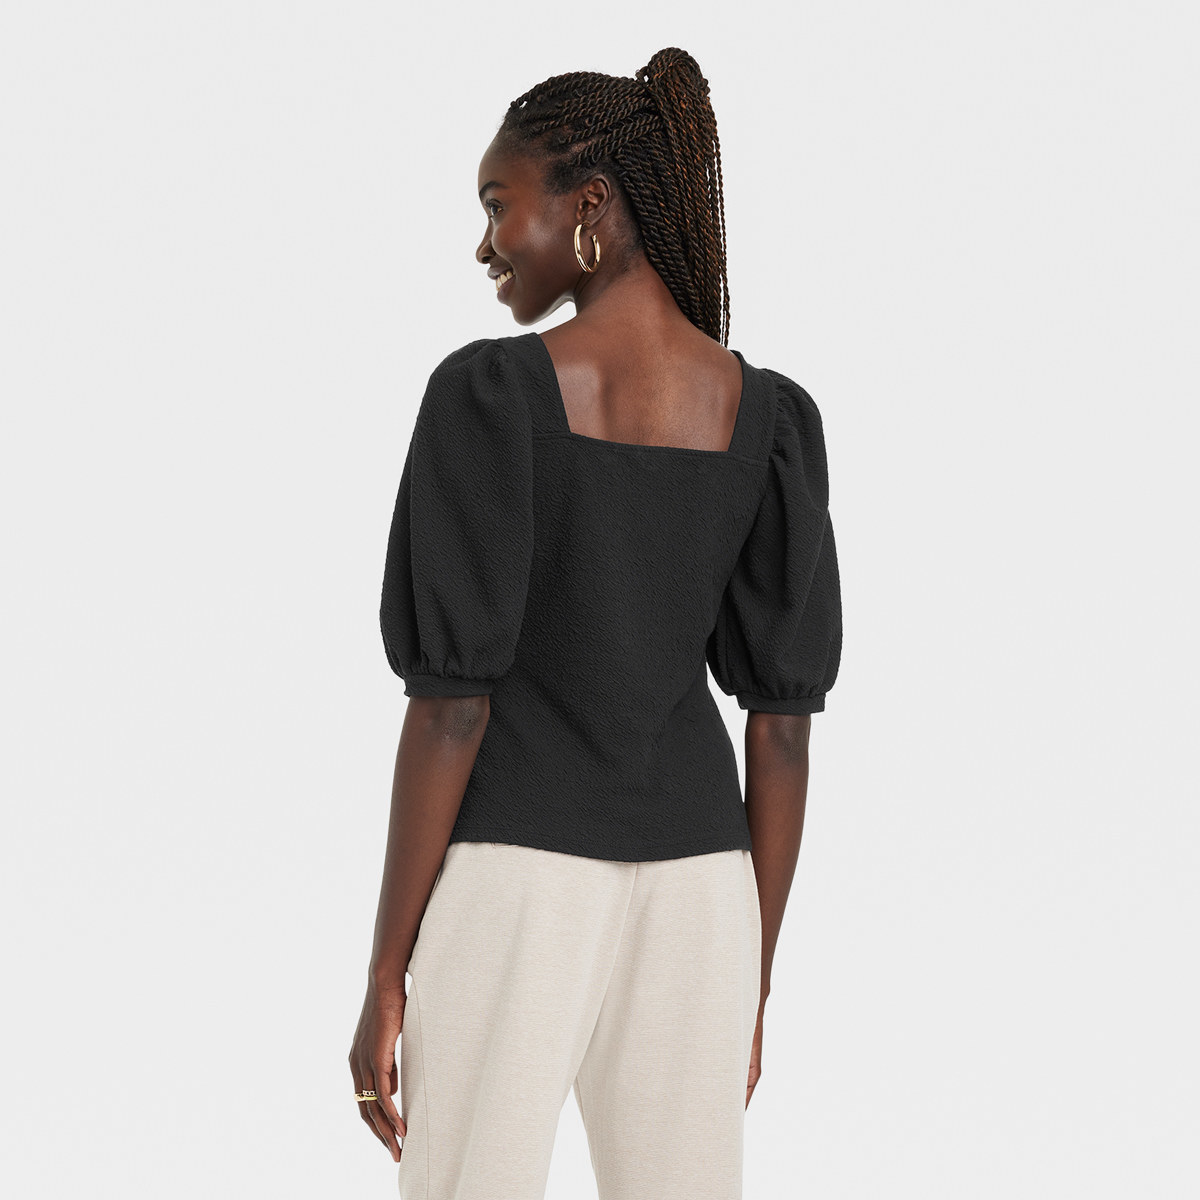 Woman wears square neck shirt with puffy sleeves and gold hoops